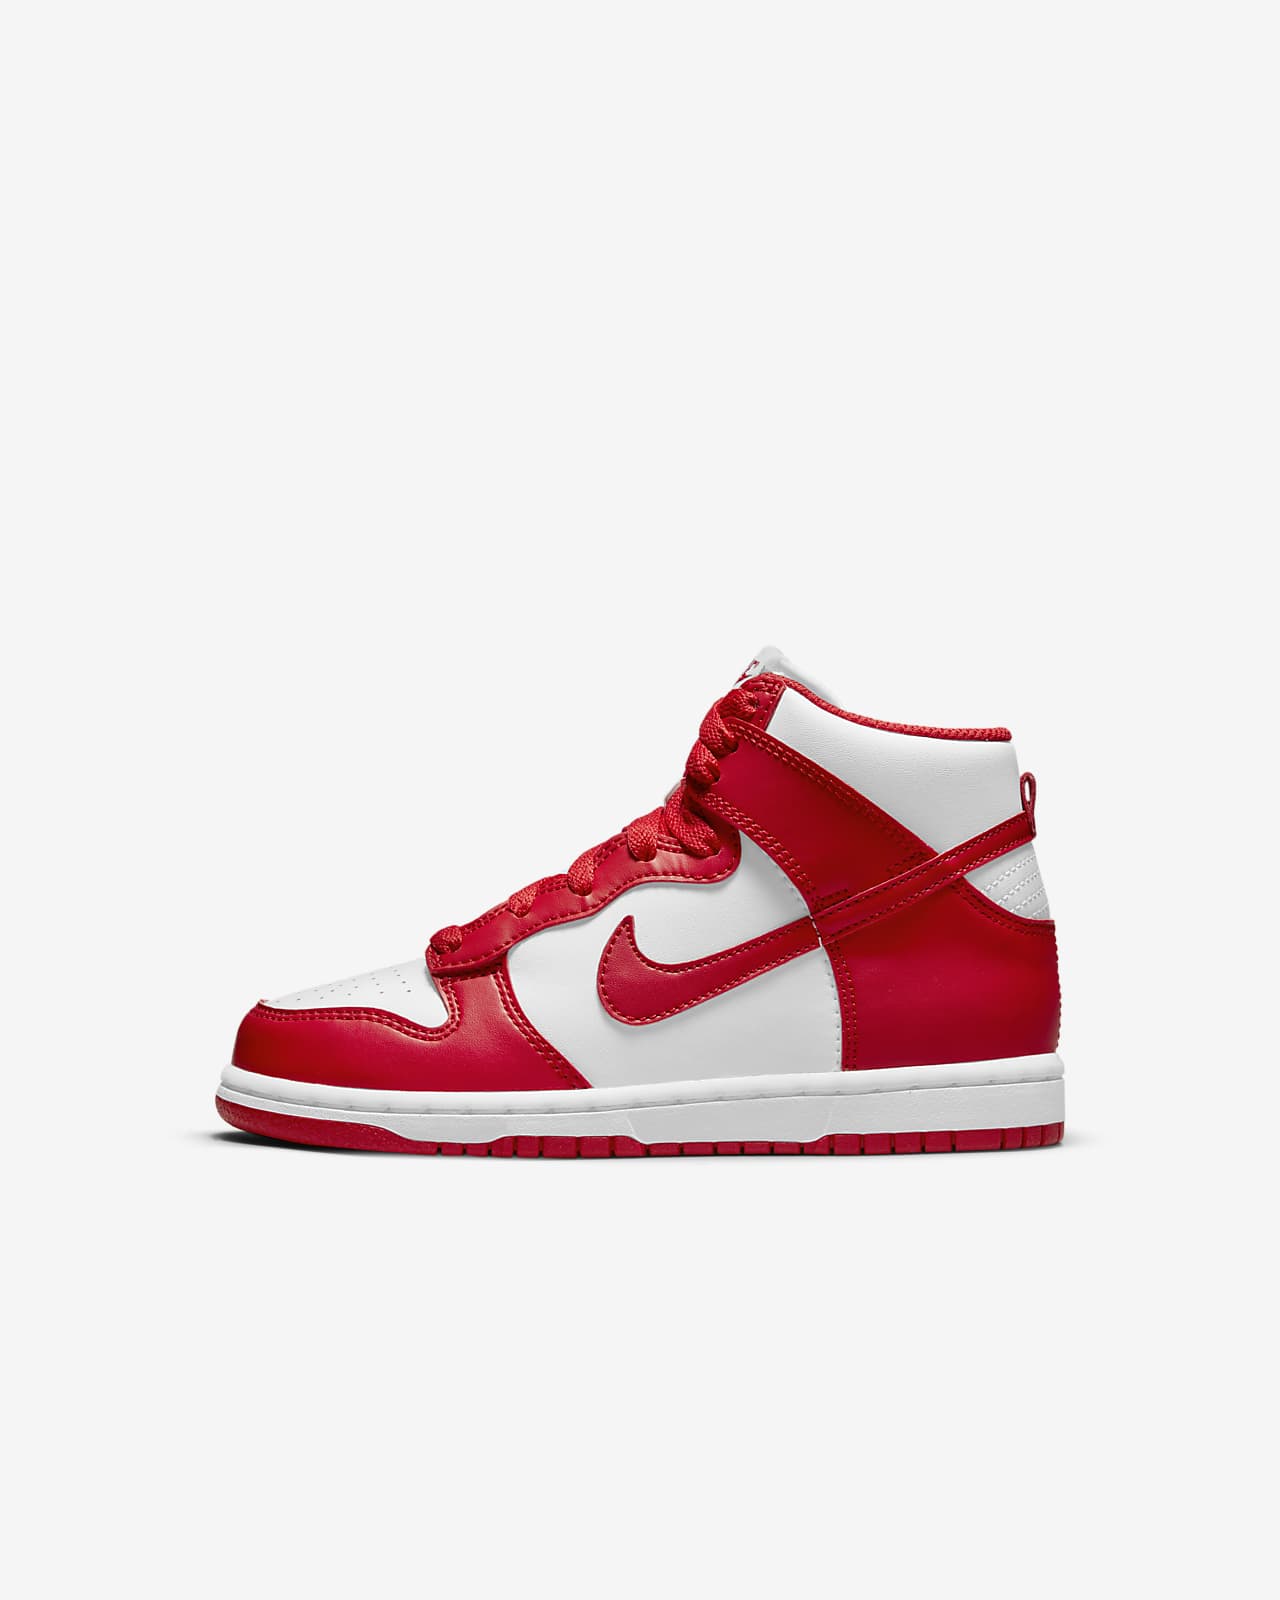 Buy Cheap Red Nike Shoes Online | Running Men’s Air Max & Women’s Air Max 270 Shoes